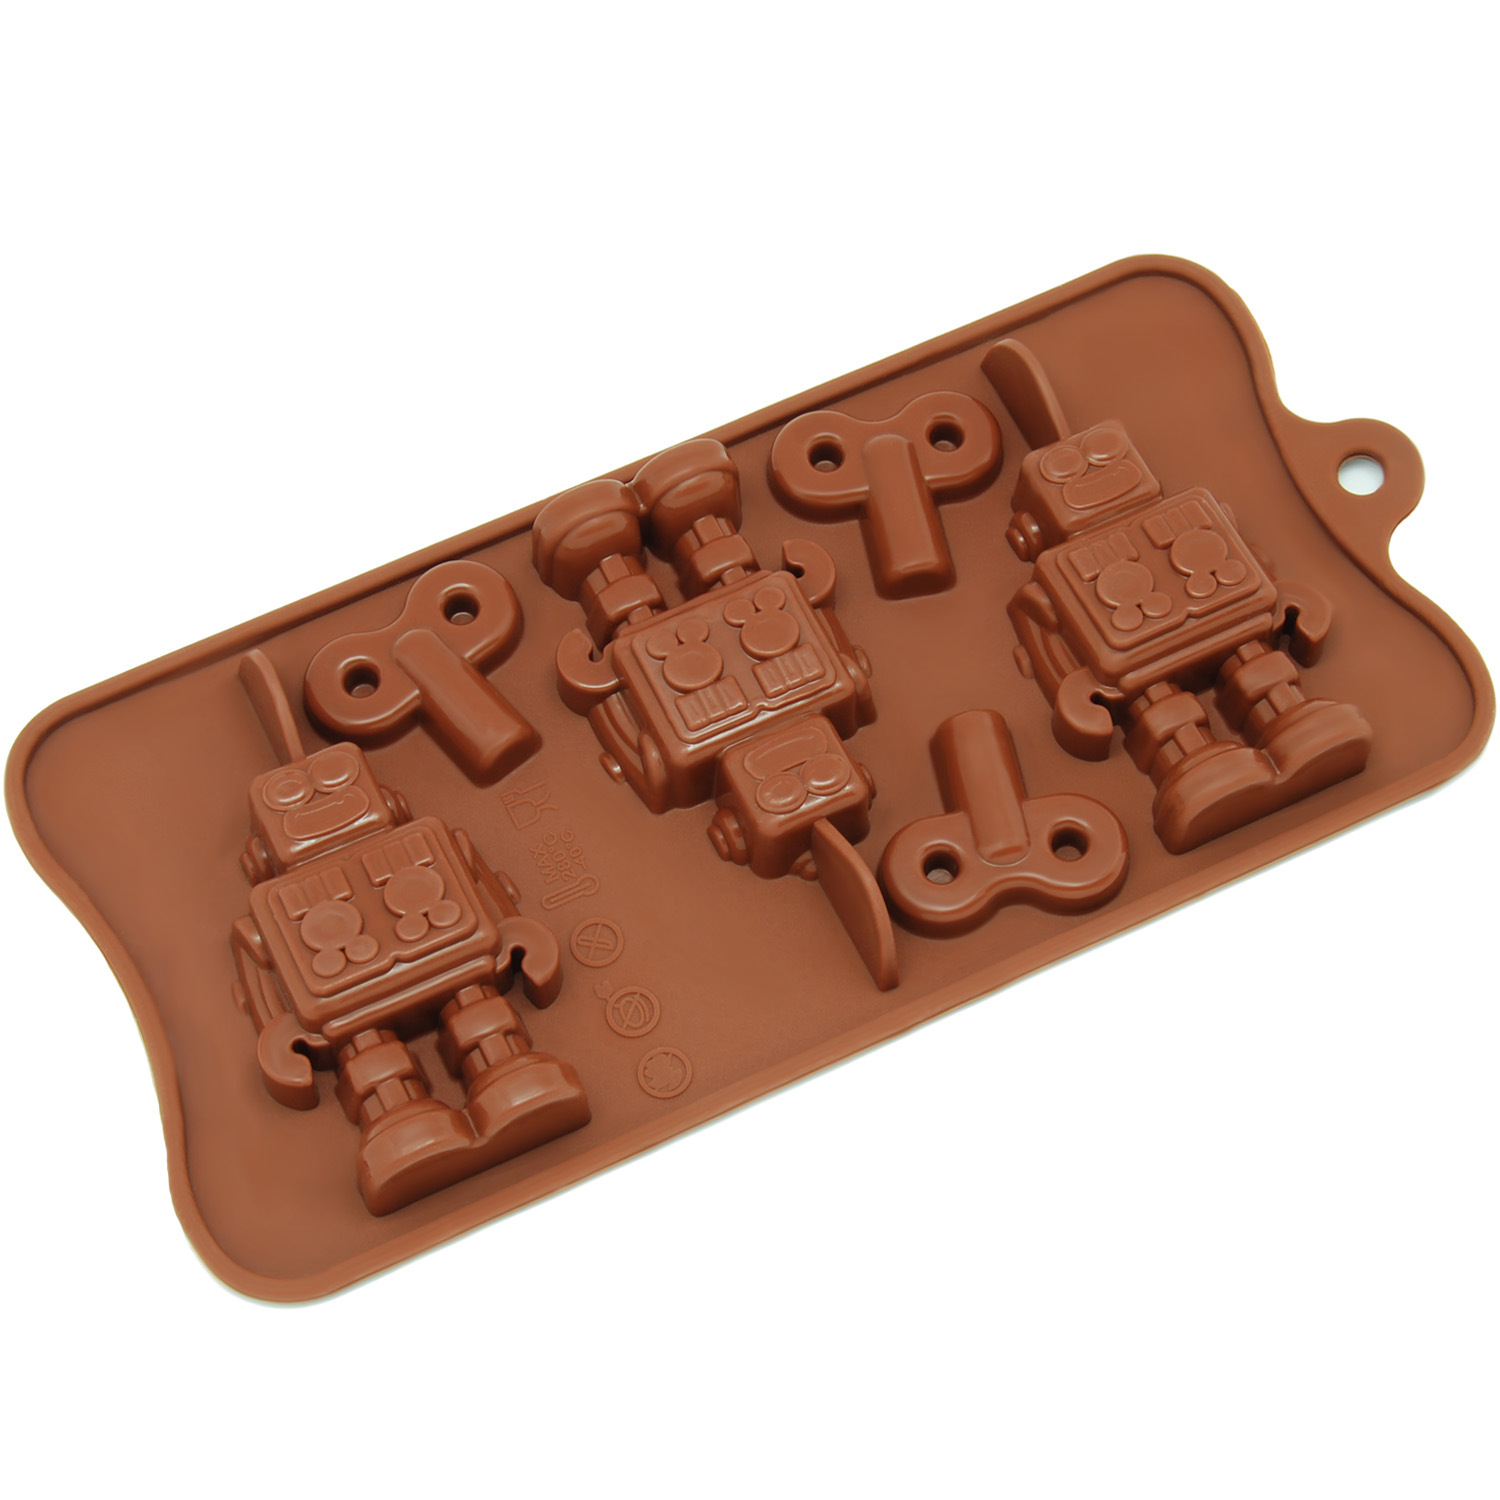 Freshware Silicone Mold, Chocolate Mold, Candy Mold, Ice Mold, Soap Mold for Chocolate, Candy and Gummy, Robot , 6-Cavity